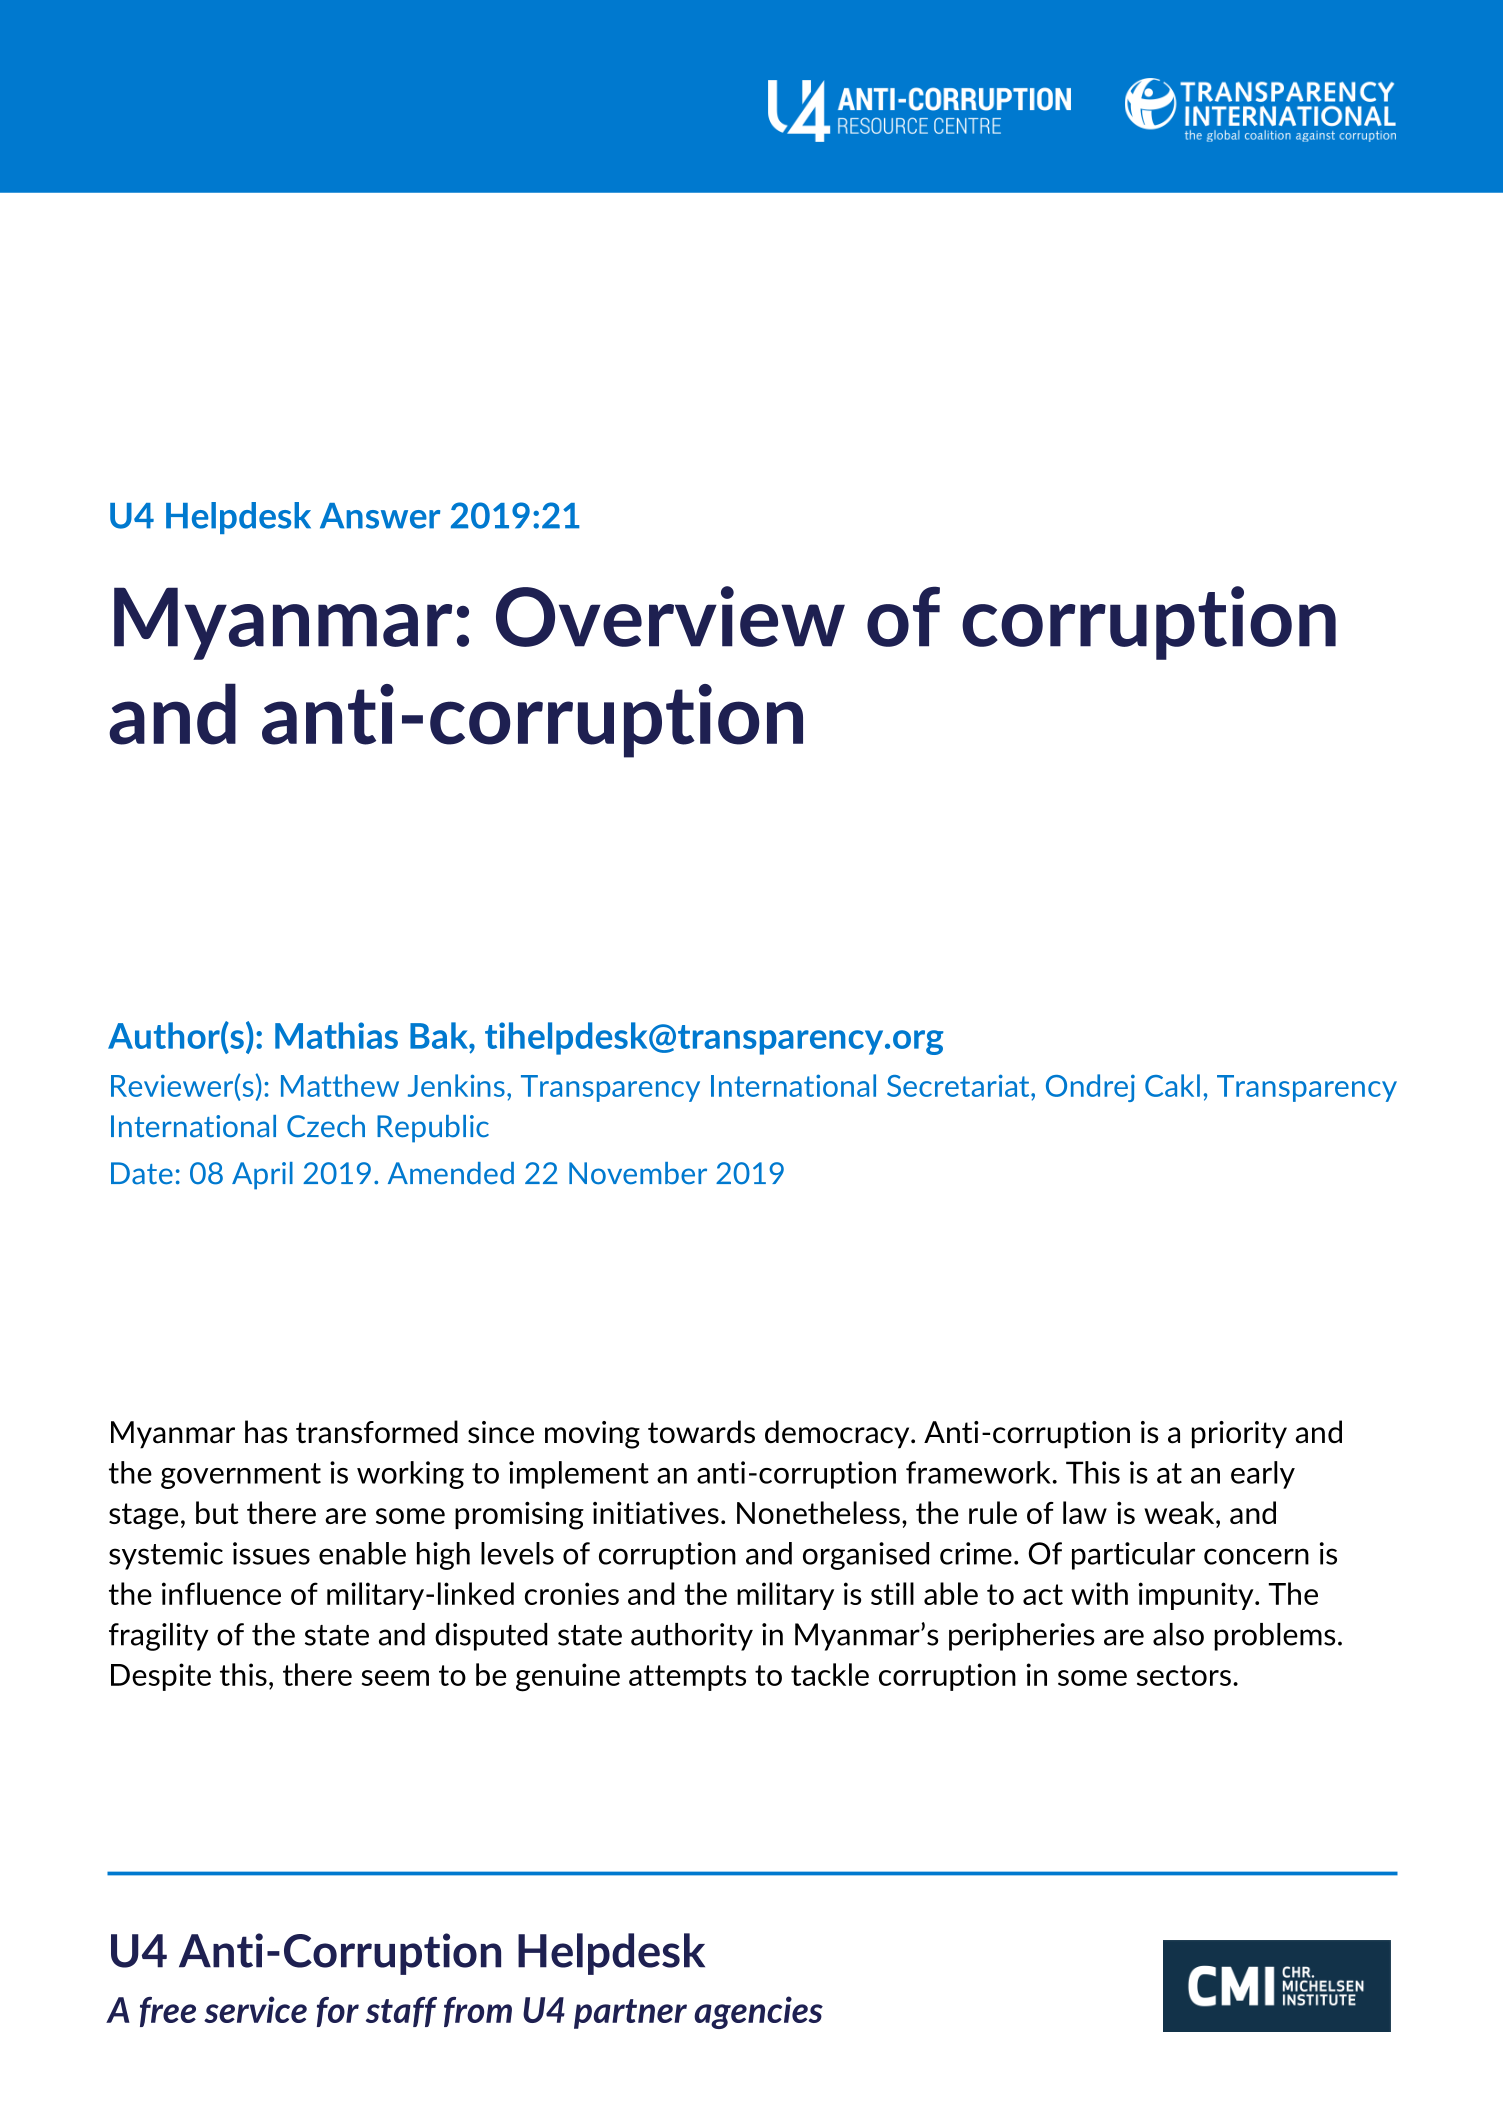 Myanmar: Overview of corruption and anti-corruption